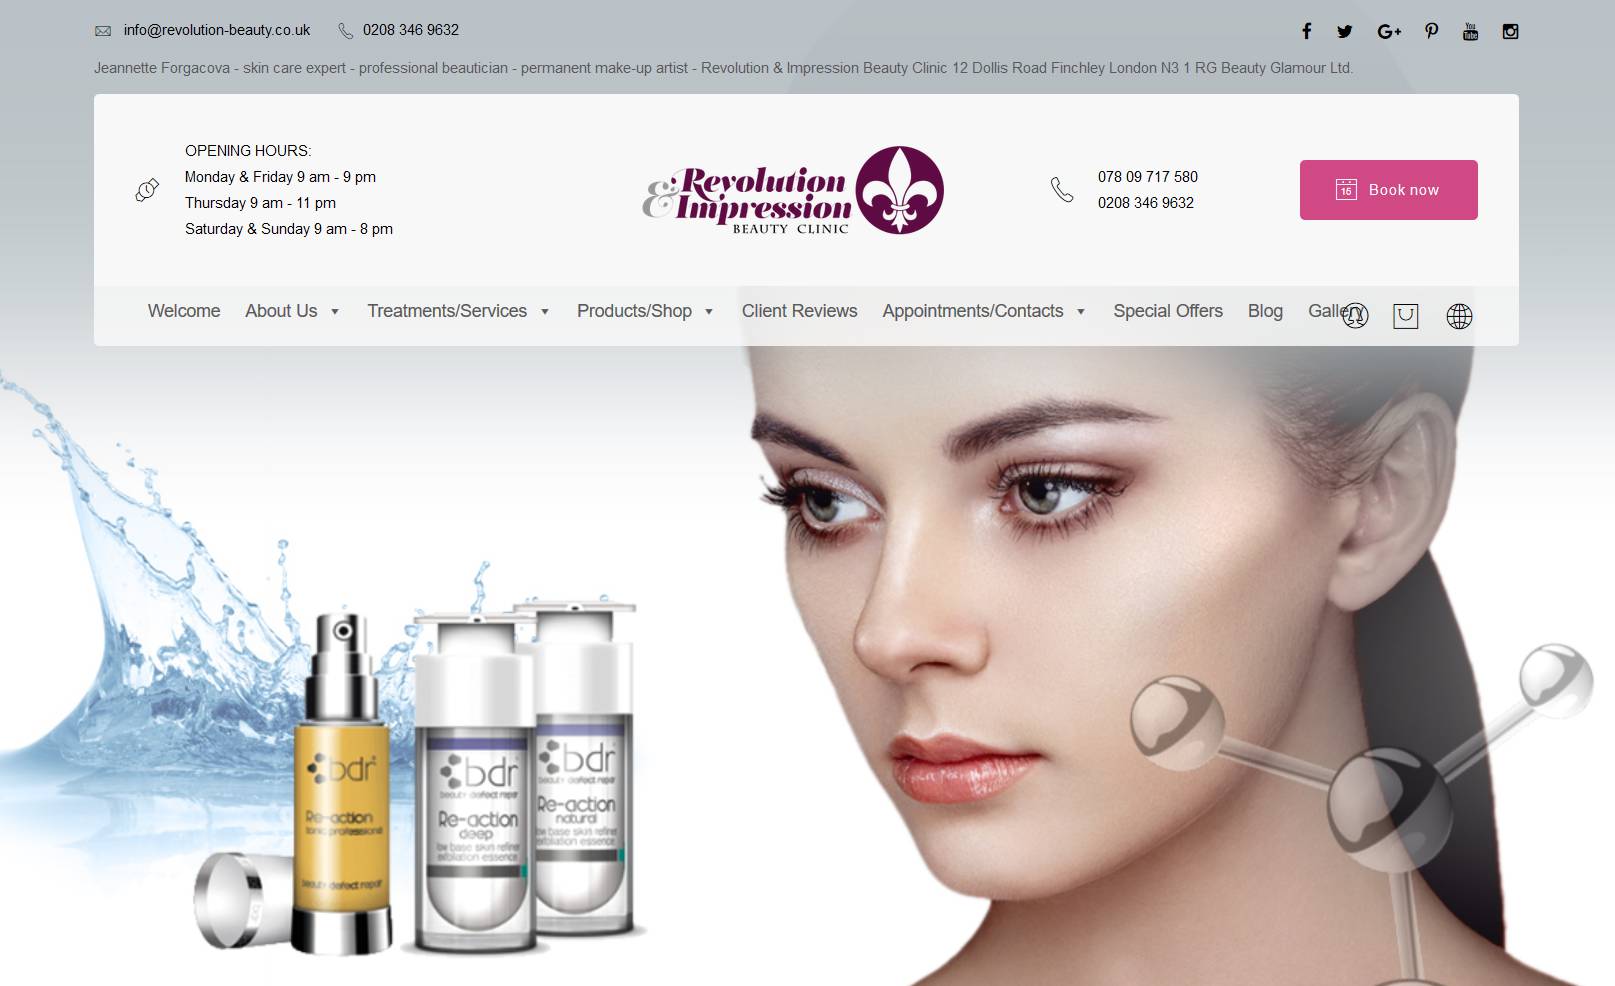 beauty-clinic-banner-image-1